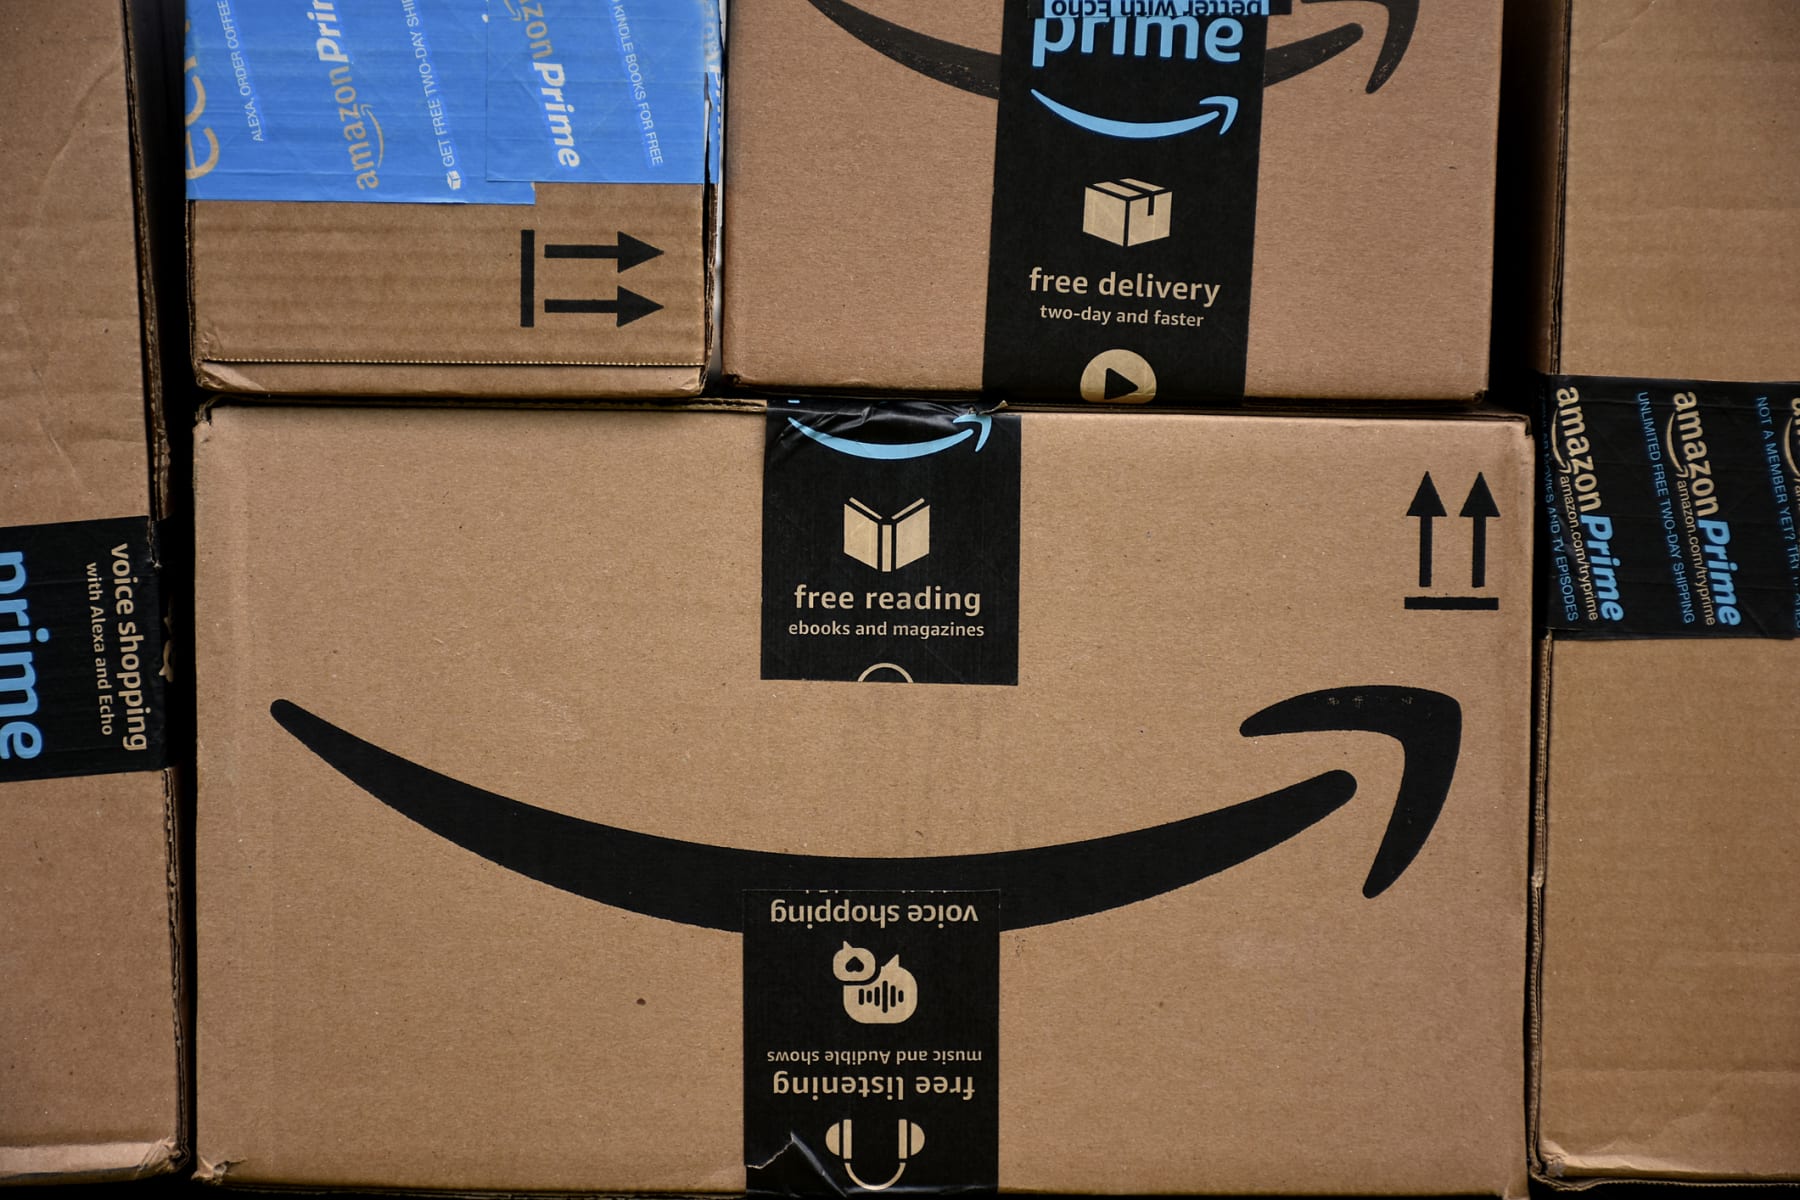 Amazon boxes stacked on top of each other.